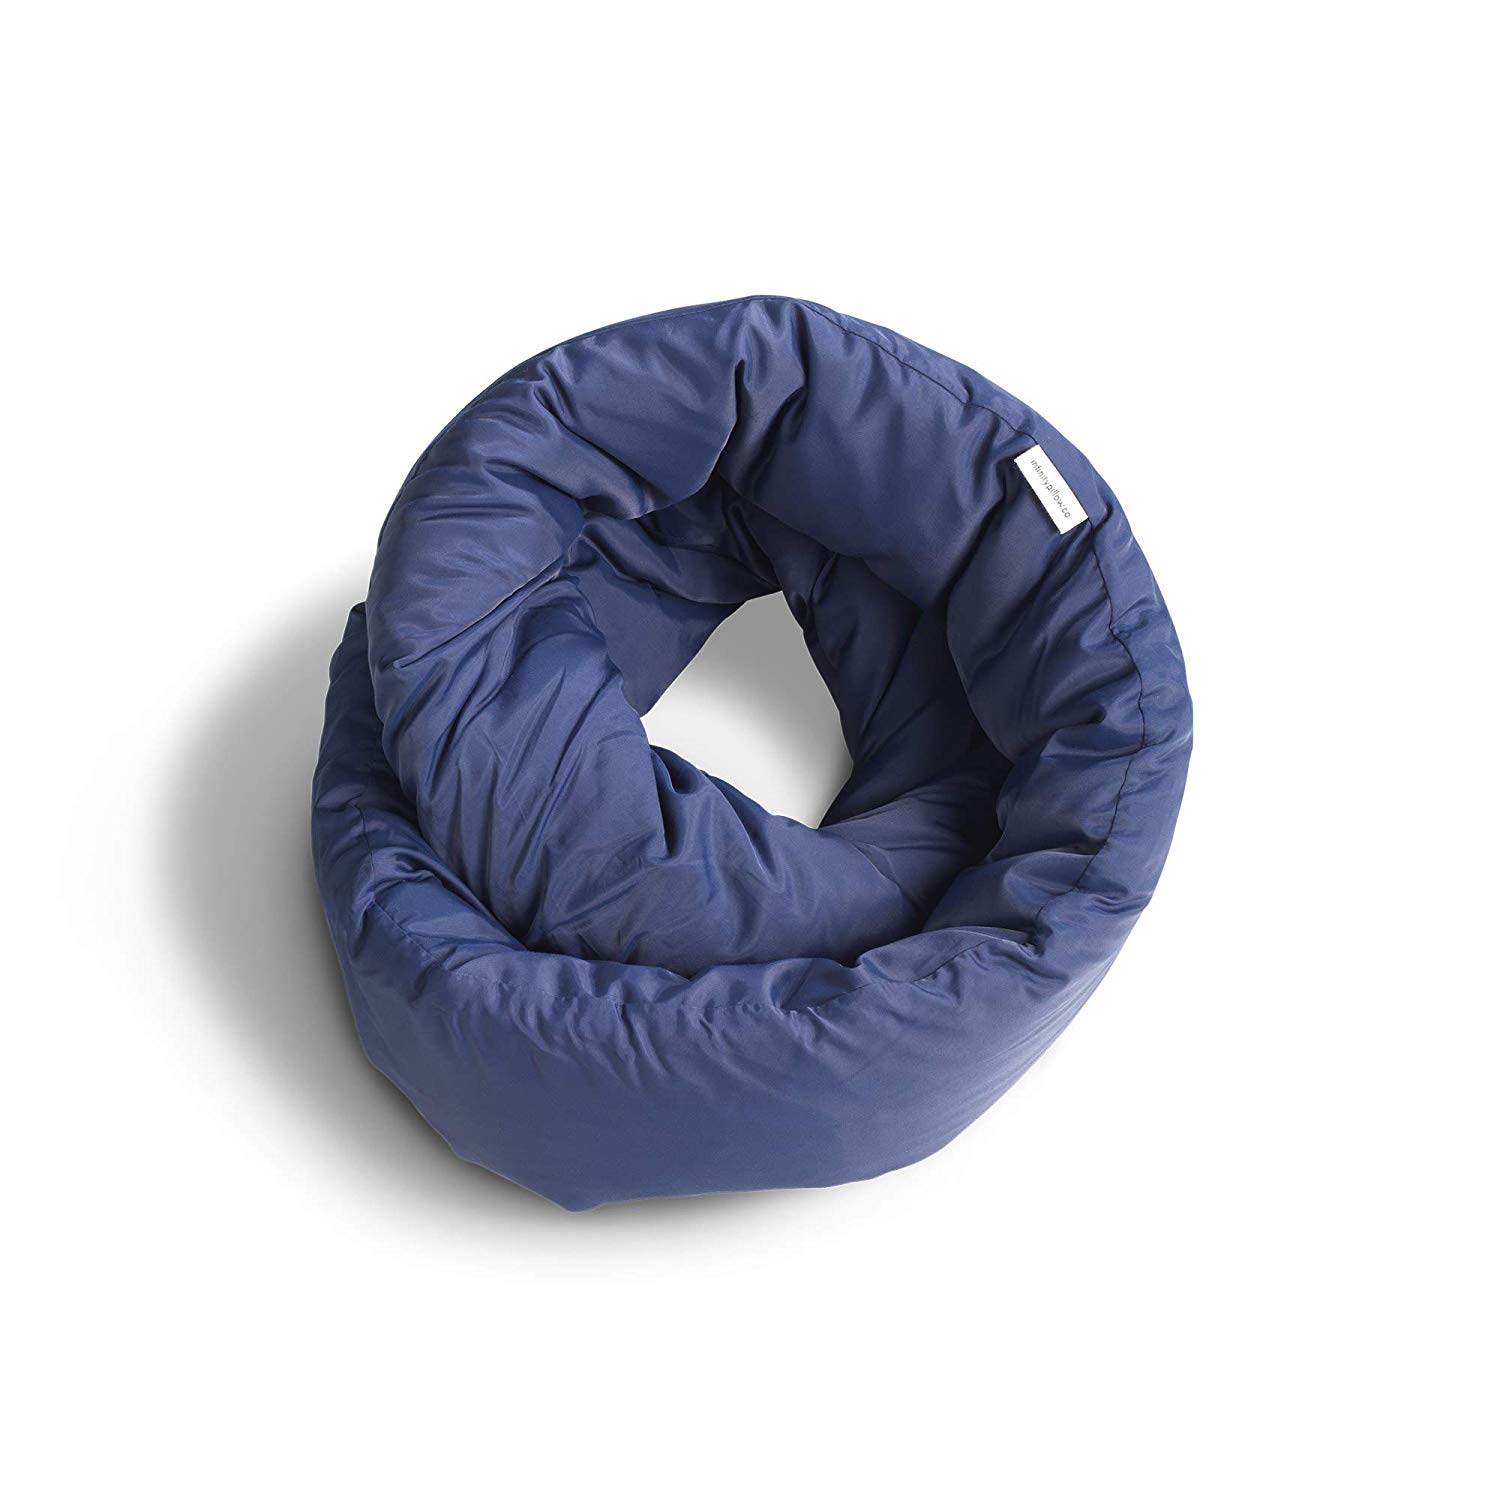 blow up neck pillow for plane | Comfortable airplane pillow